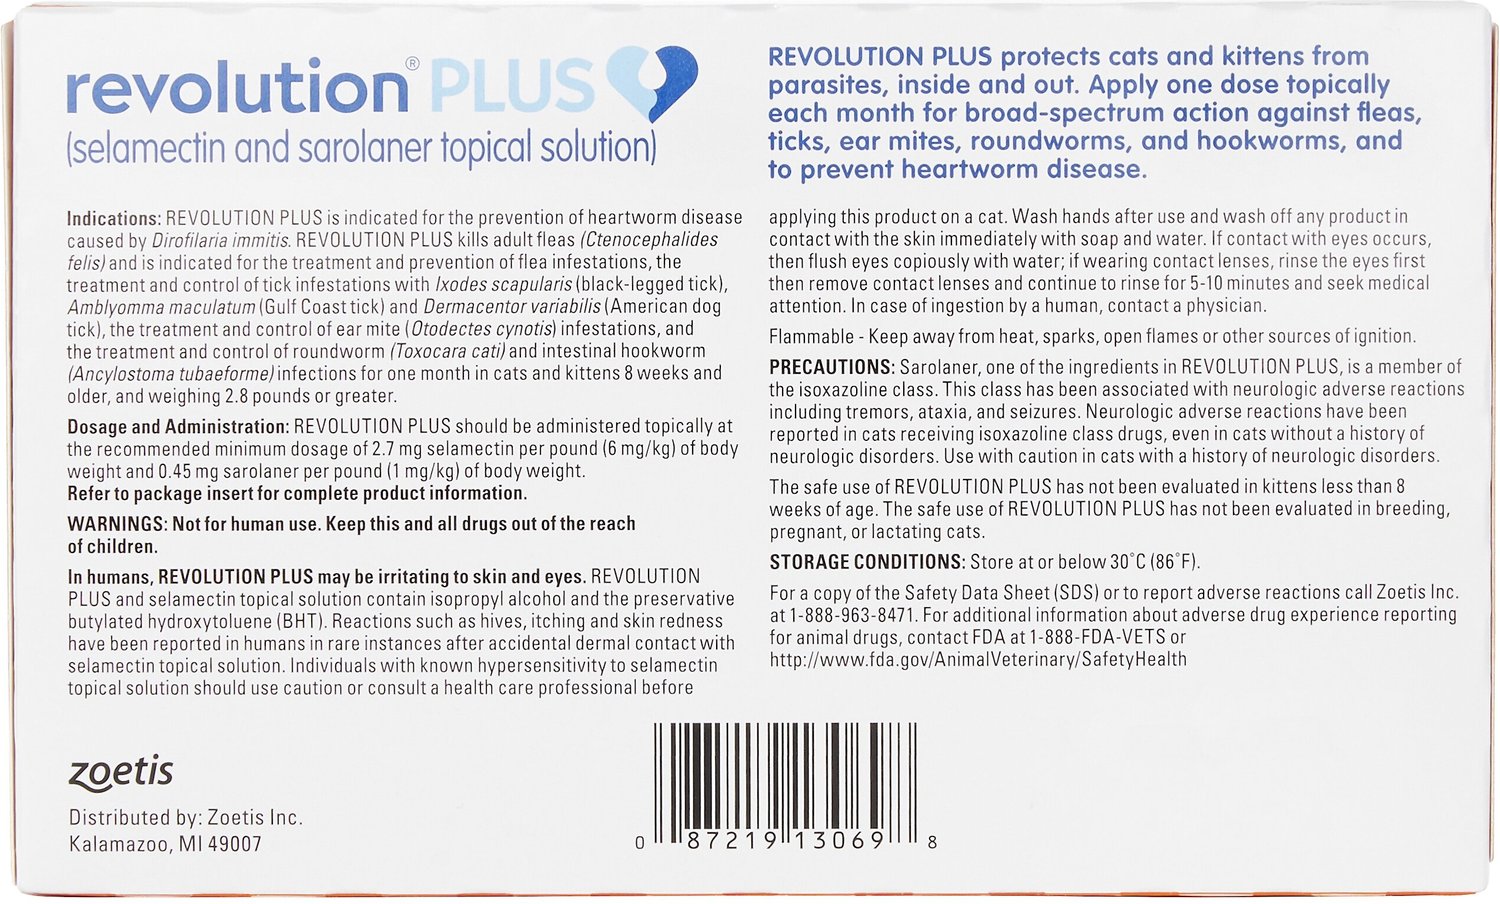 Revolution Plus Topical Solution for Cats, 5.611 lbs, 6 treatment